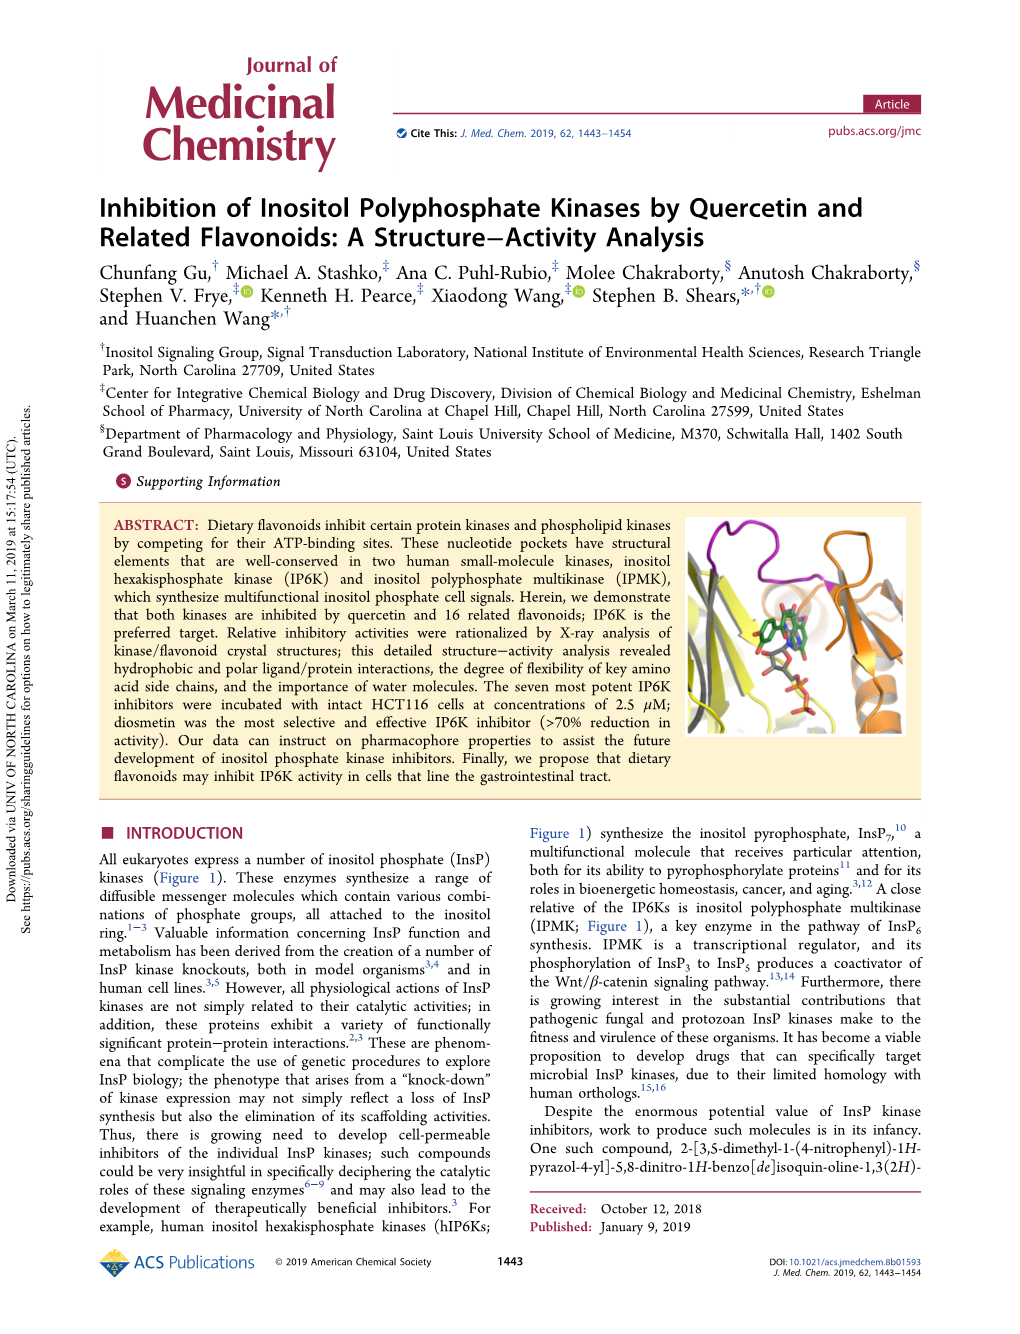 Inhibition of Inositol Polyphosphate Kinases by Quercetin and Related Flavonoids: a Structure−Activity Analysis † ‡ ‡ § § Chunfang Gu, Michael A